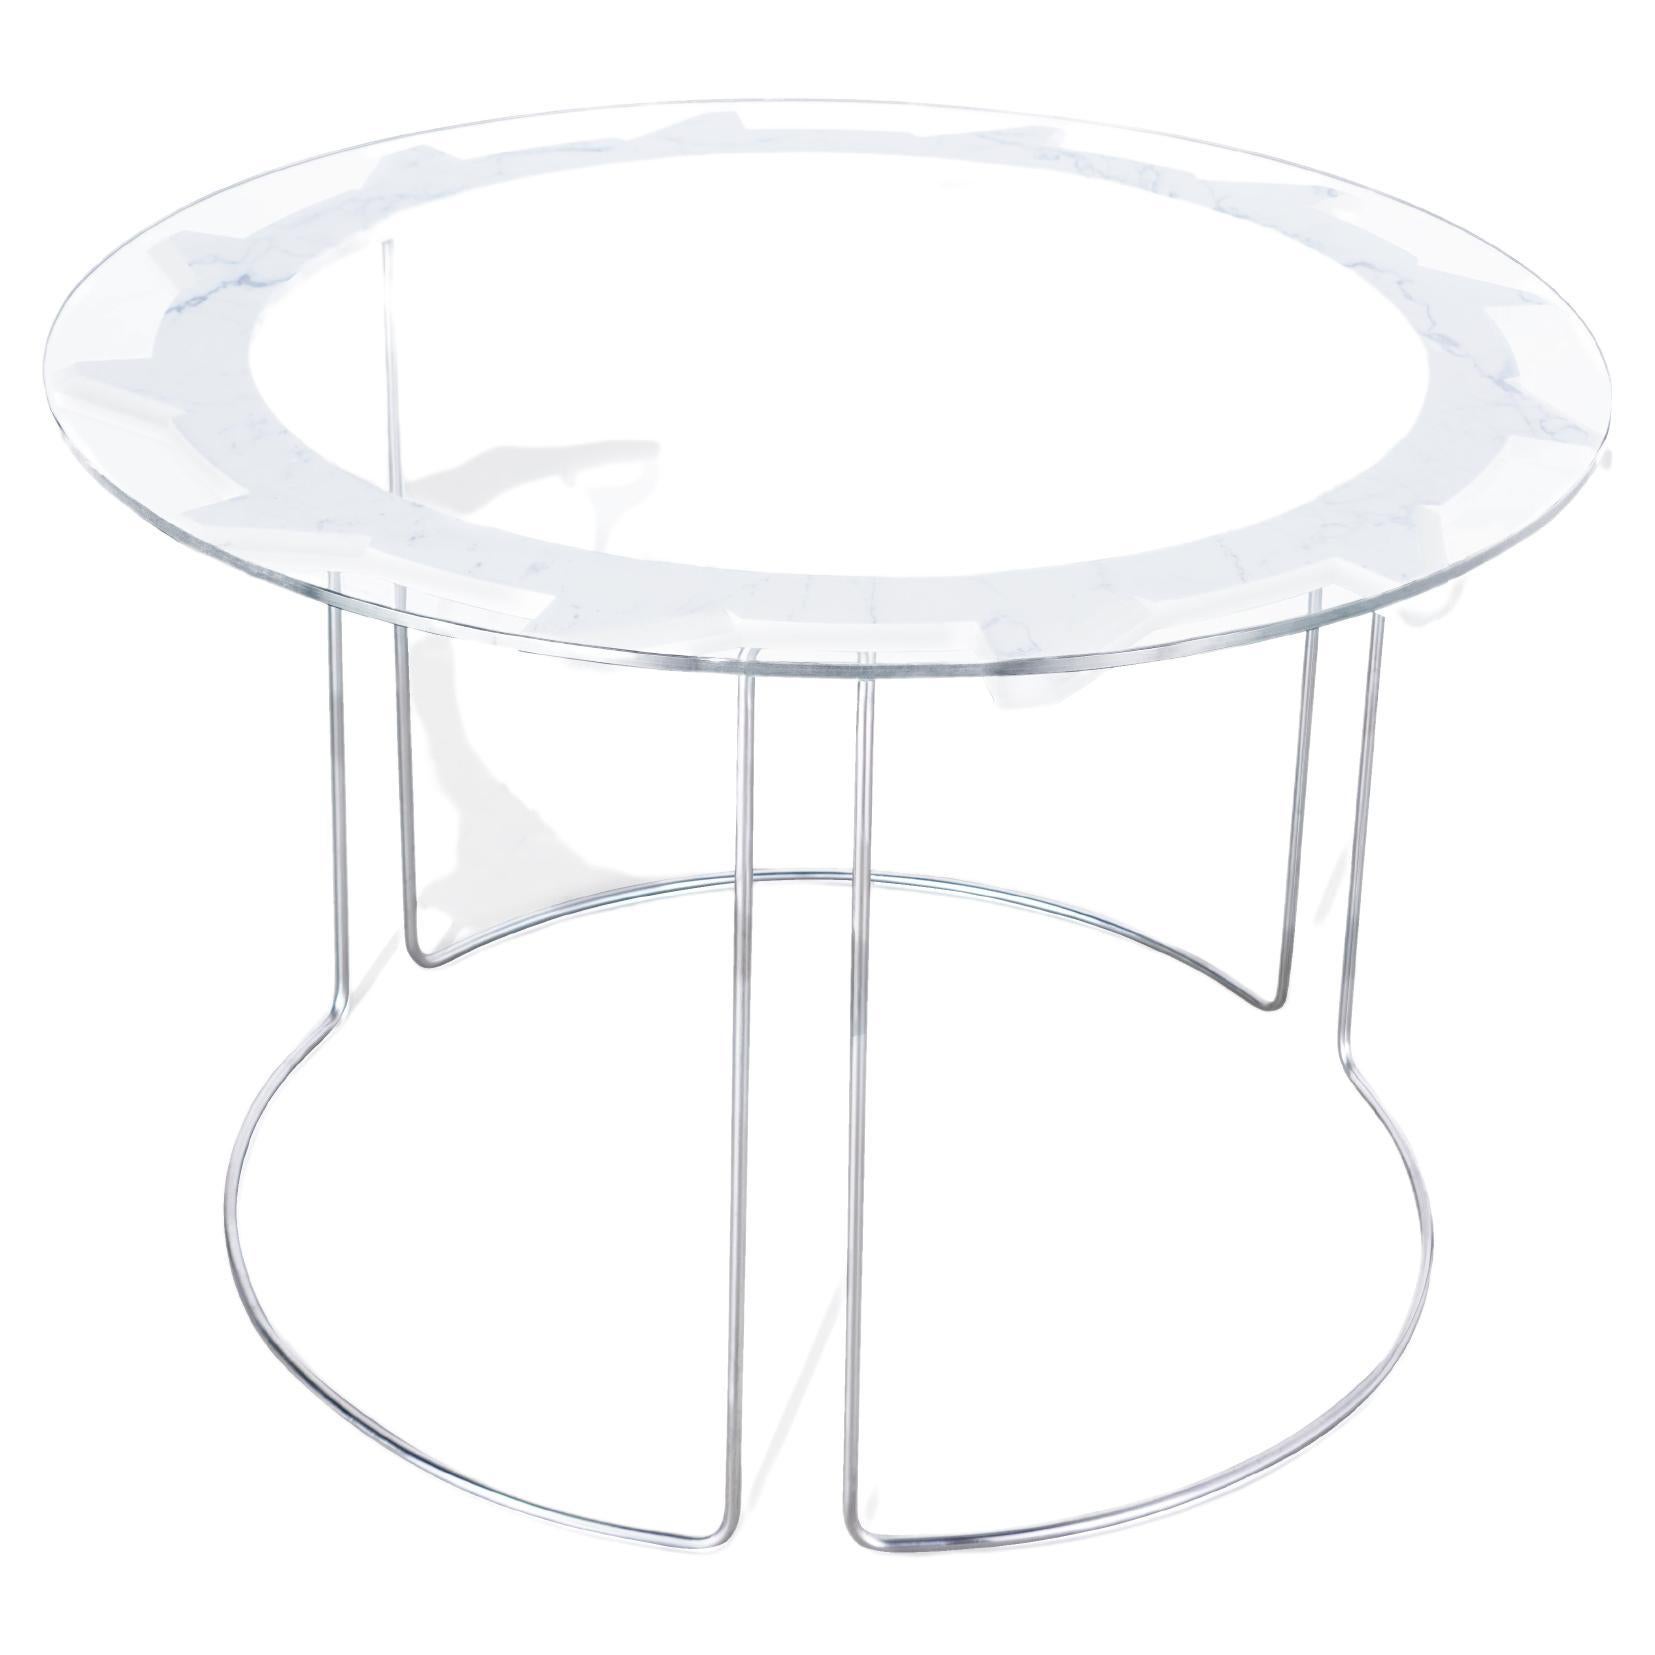 Buzzsaw Dining Table – White